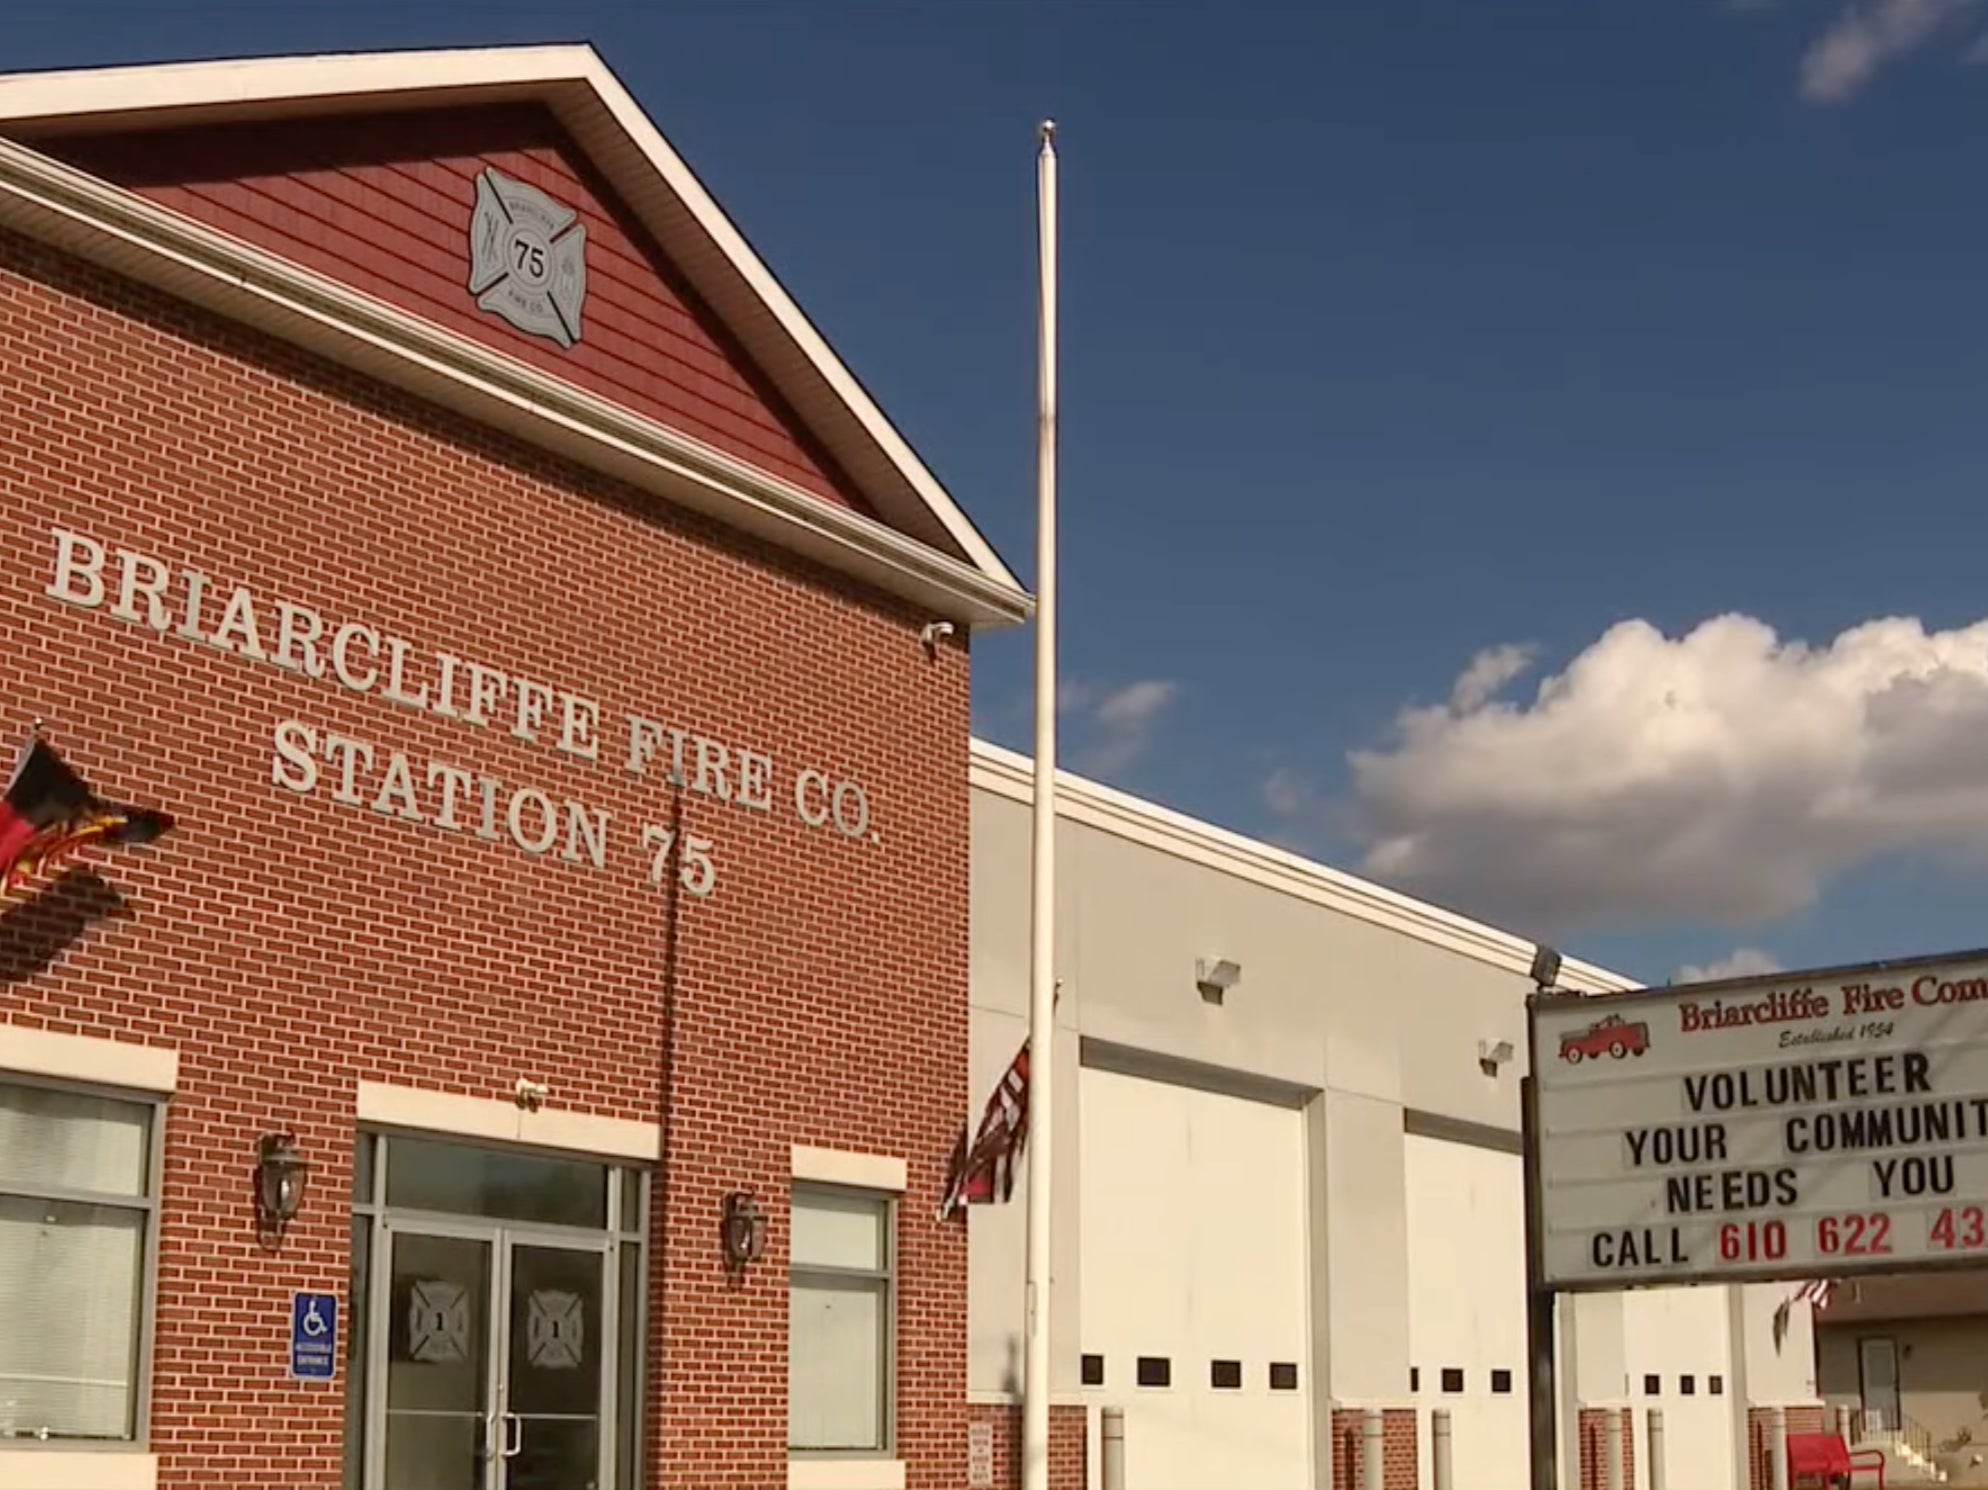 The Briarcliffe Volunteer Fire Company has been suspended